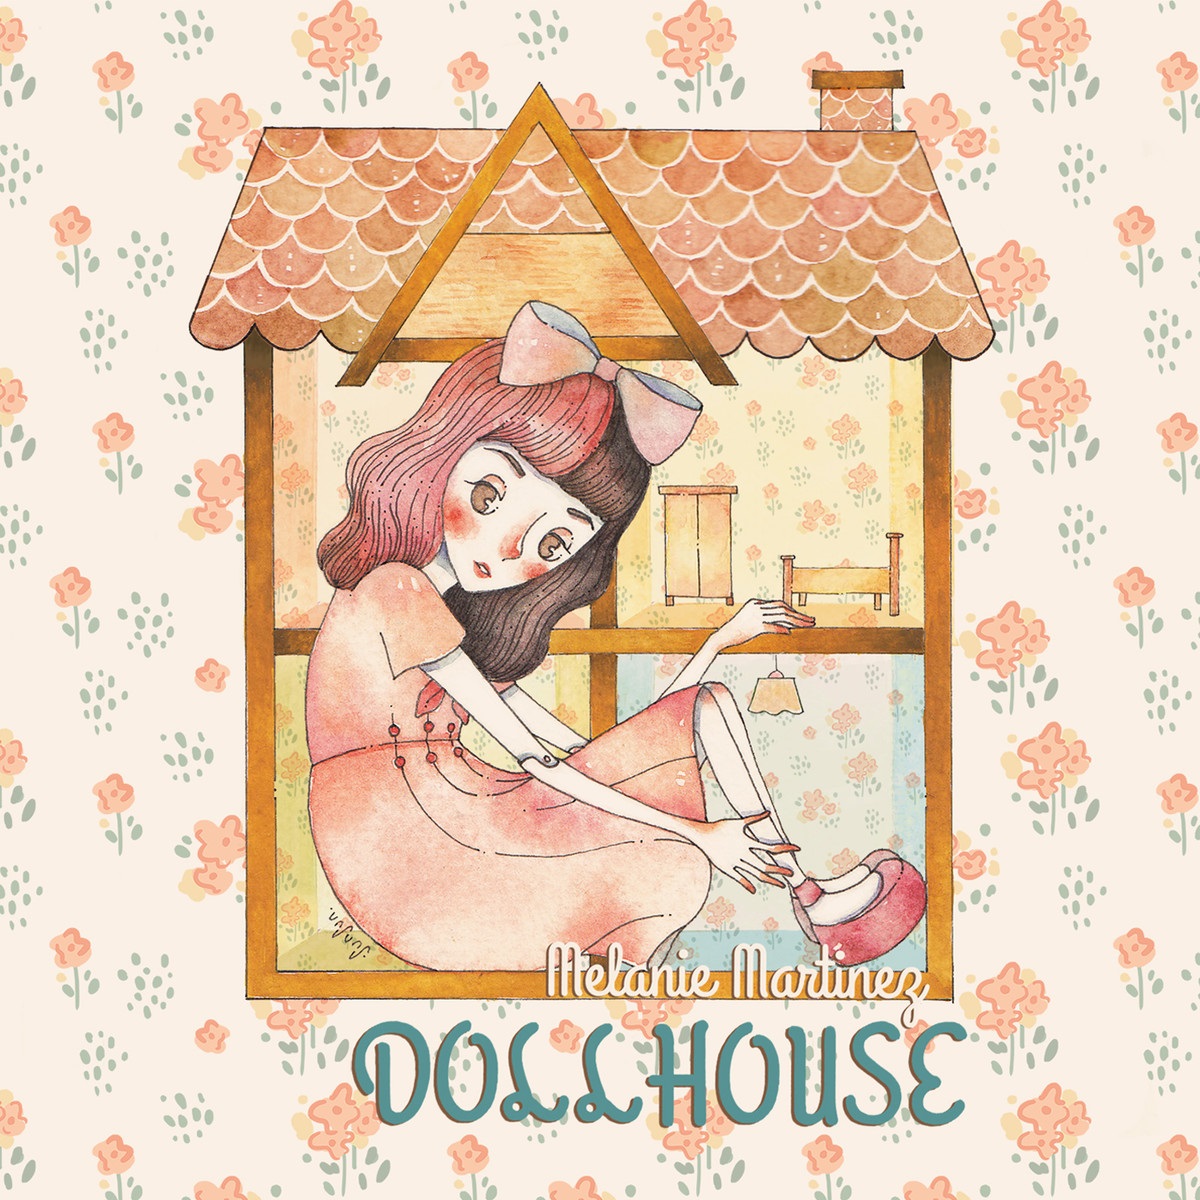 Meaning of Doll House by King Brothers